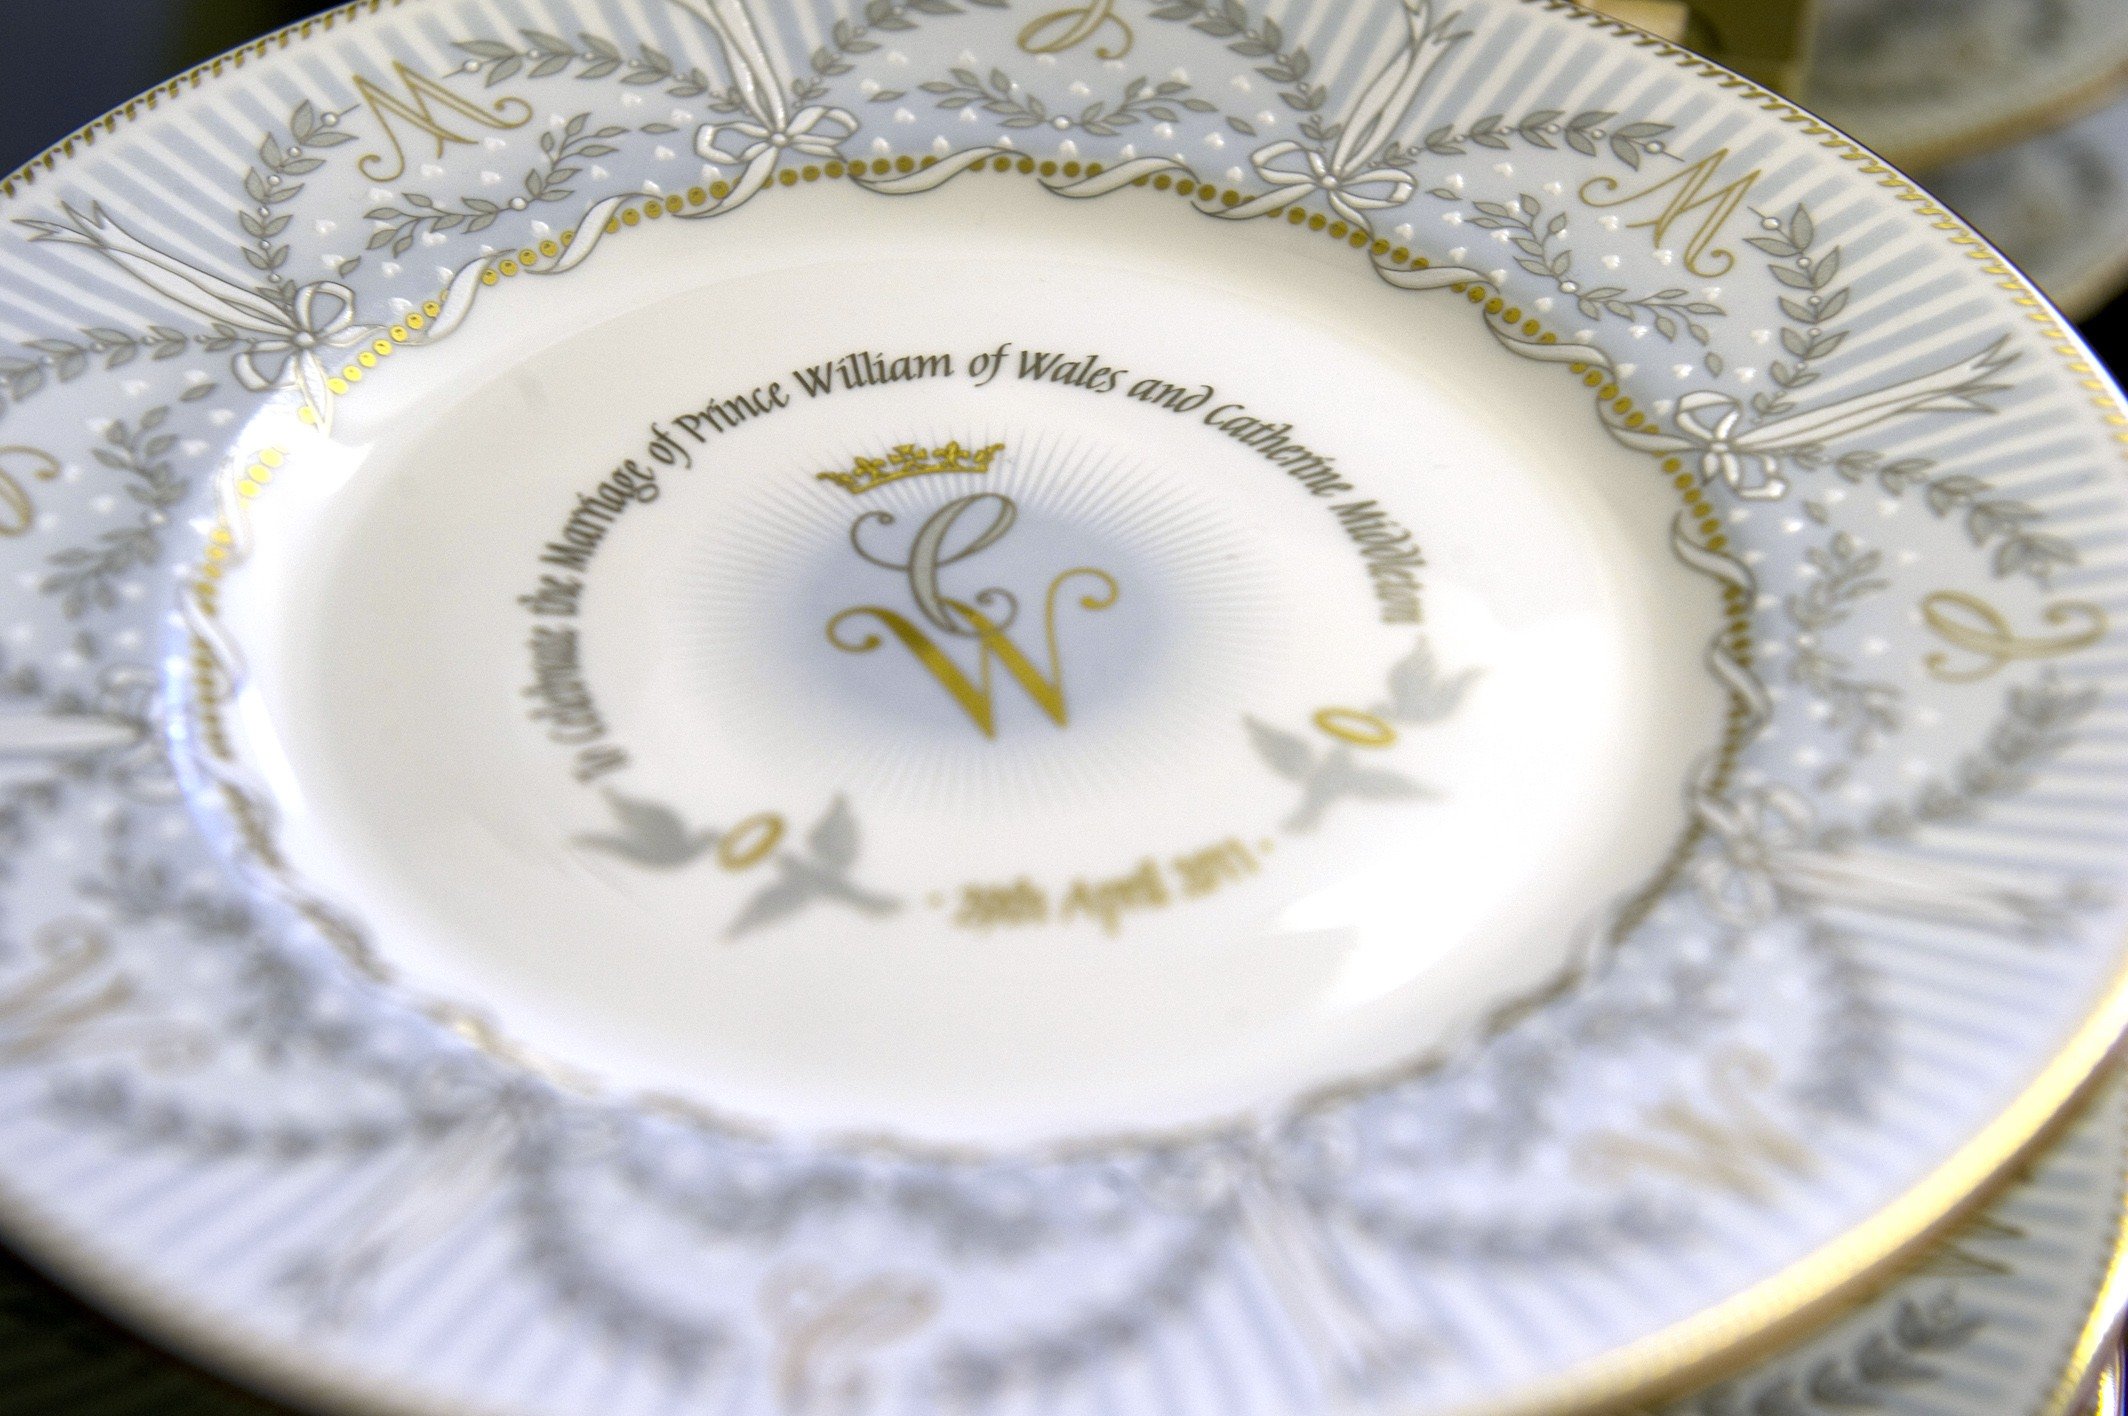 An official royal wedding commemorative plate Kate and William